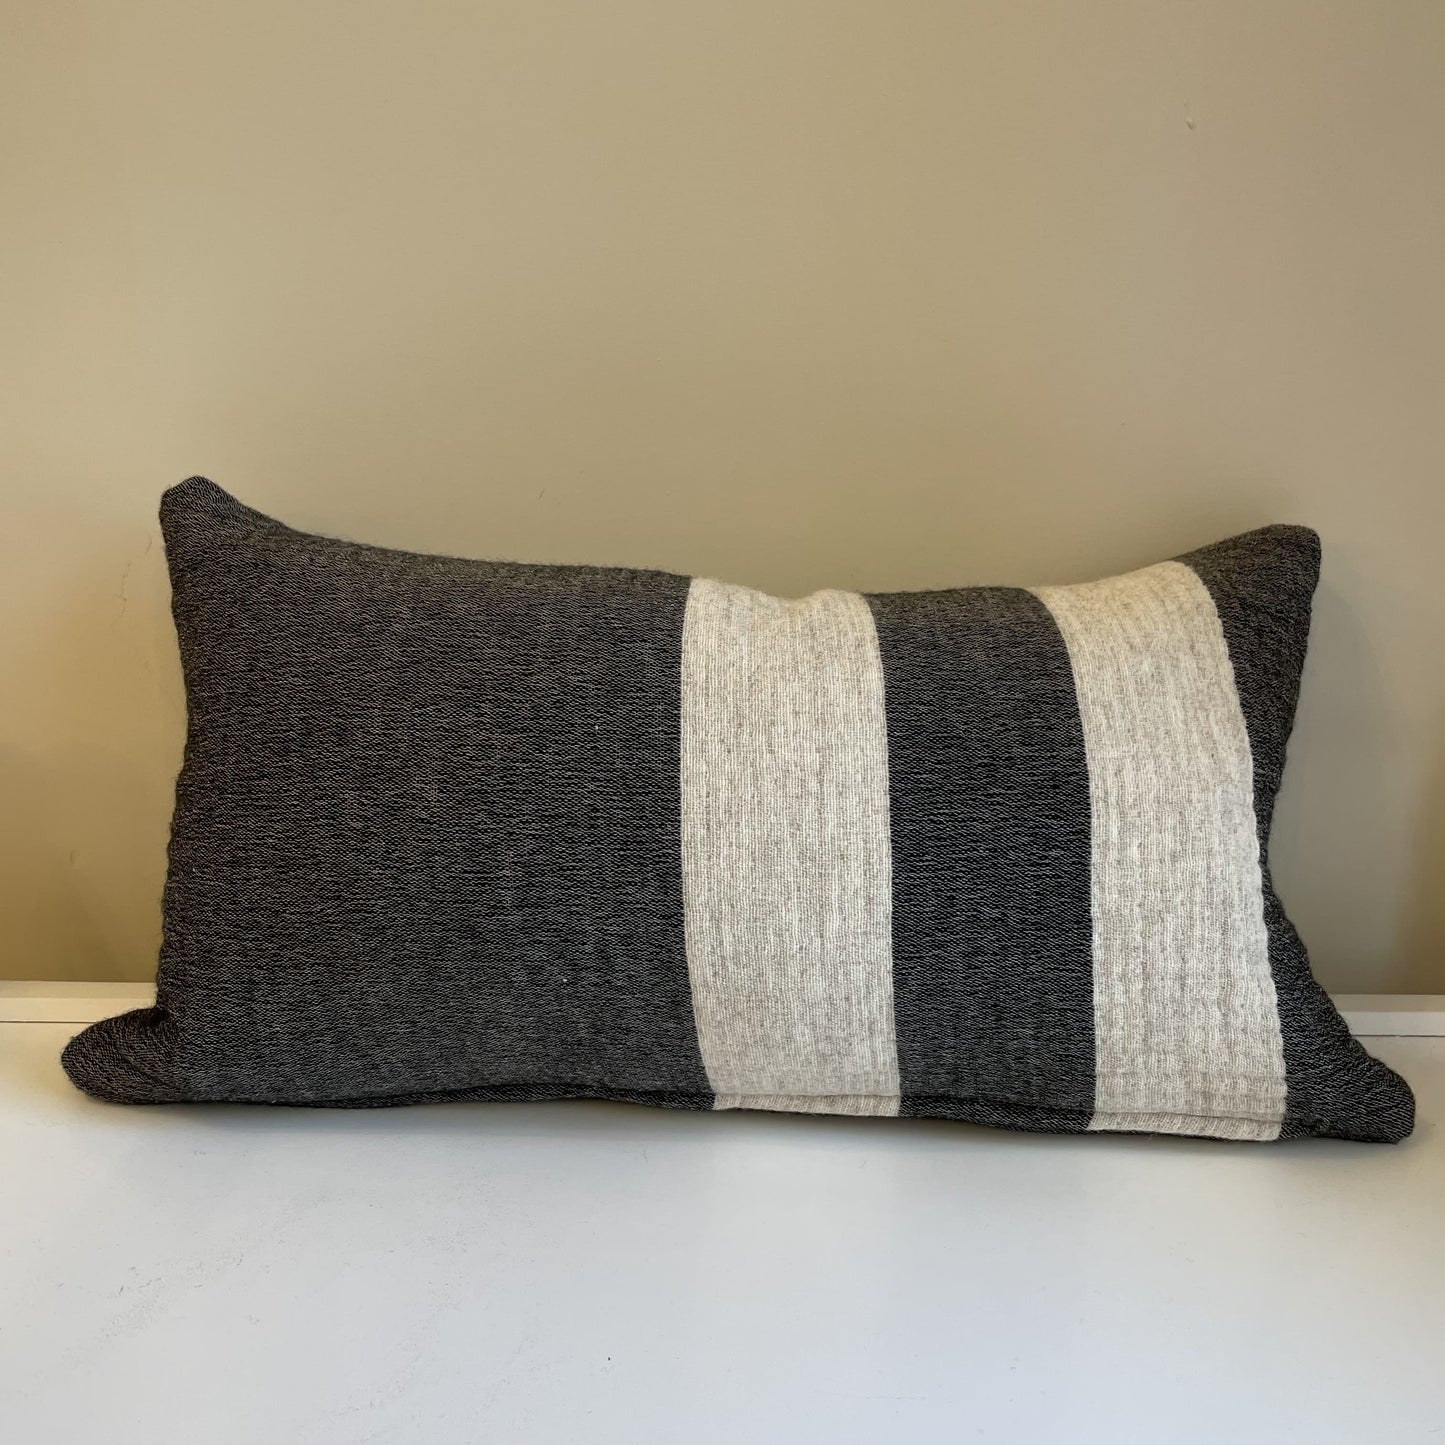 Heirloom Pillow Charcoal - 12x20